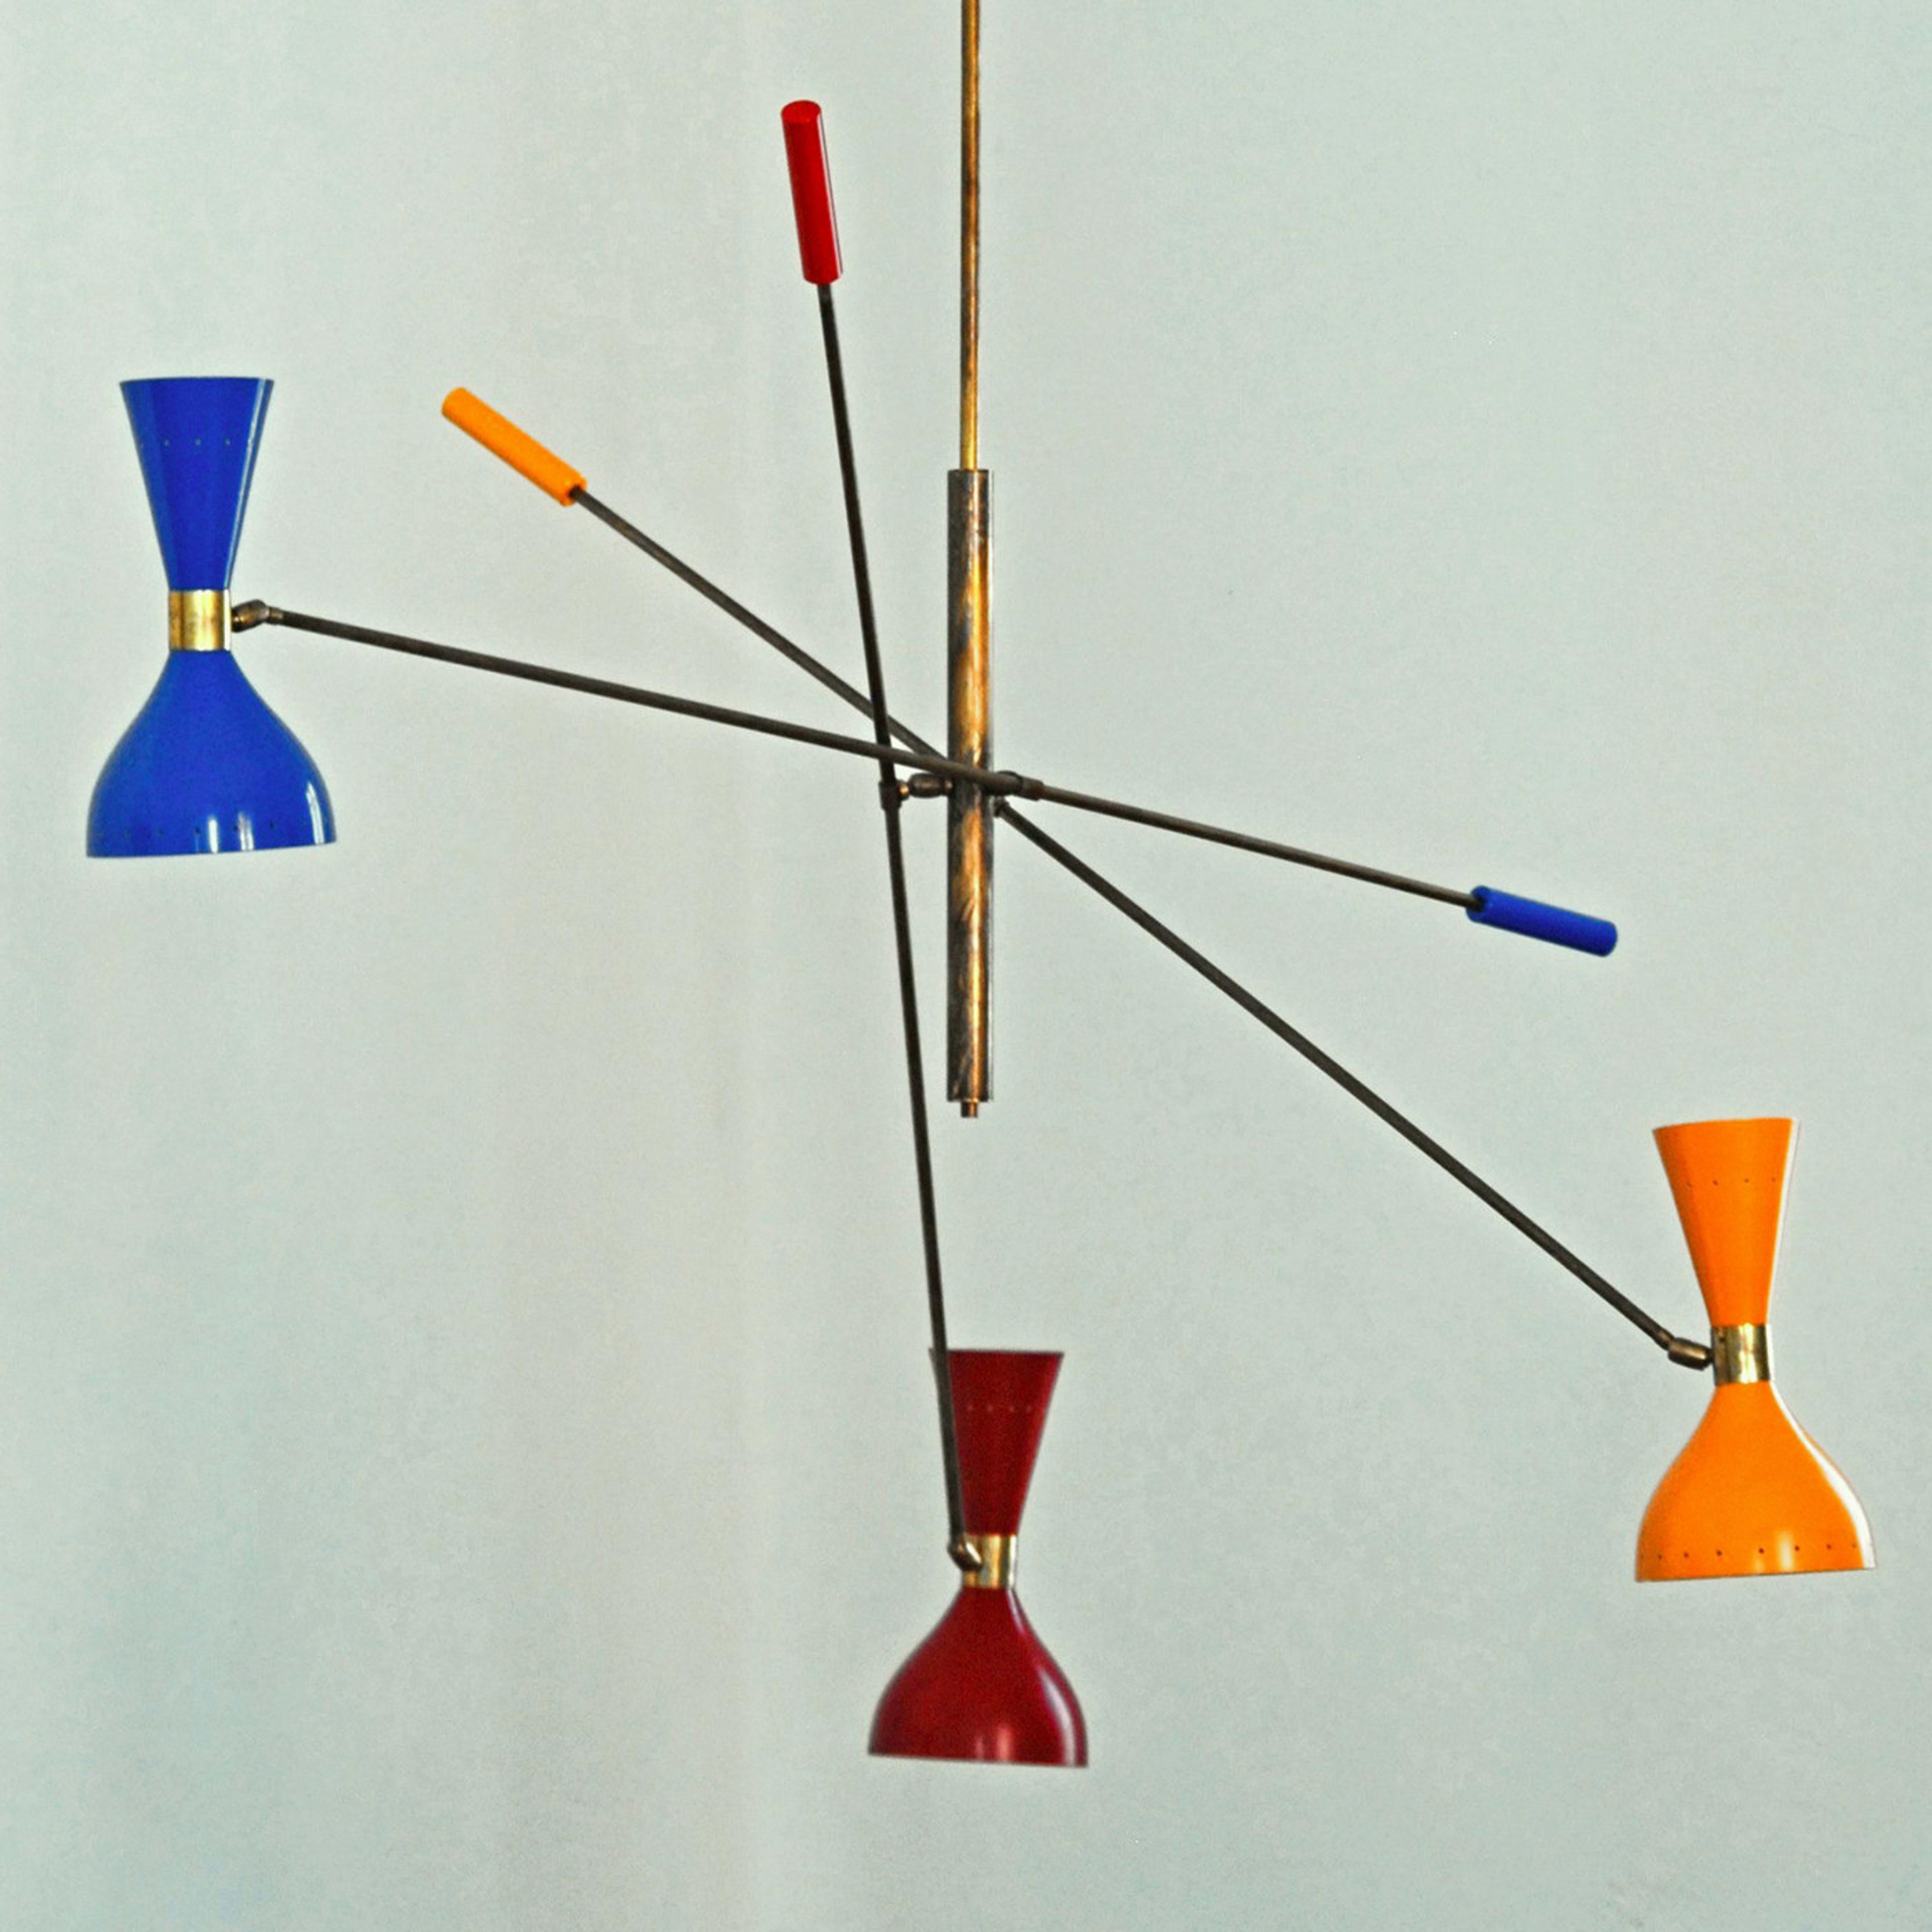 This colorful chandelier will add a dash of color and a dynamic accent to a modern interior. Inspired by iconic designs of the '50s, this piece features a natural solid brass structure with three arms balancing a double aluminum shade on one side